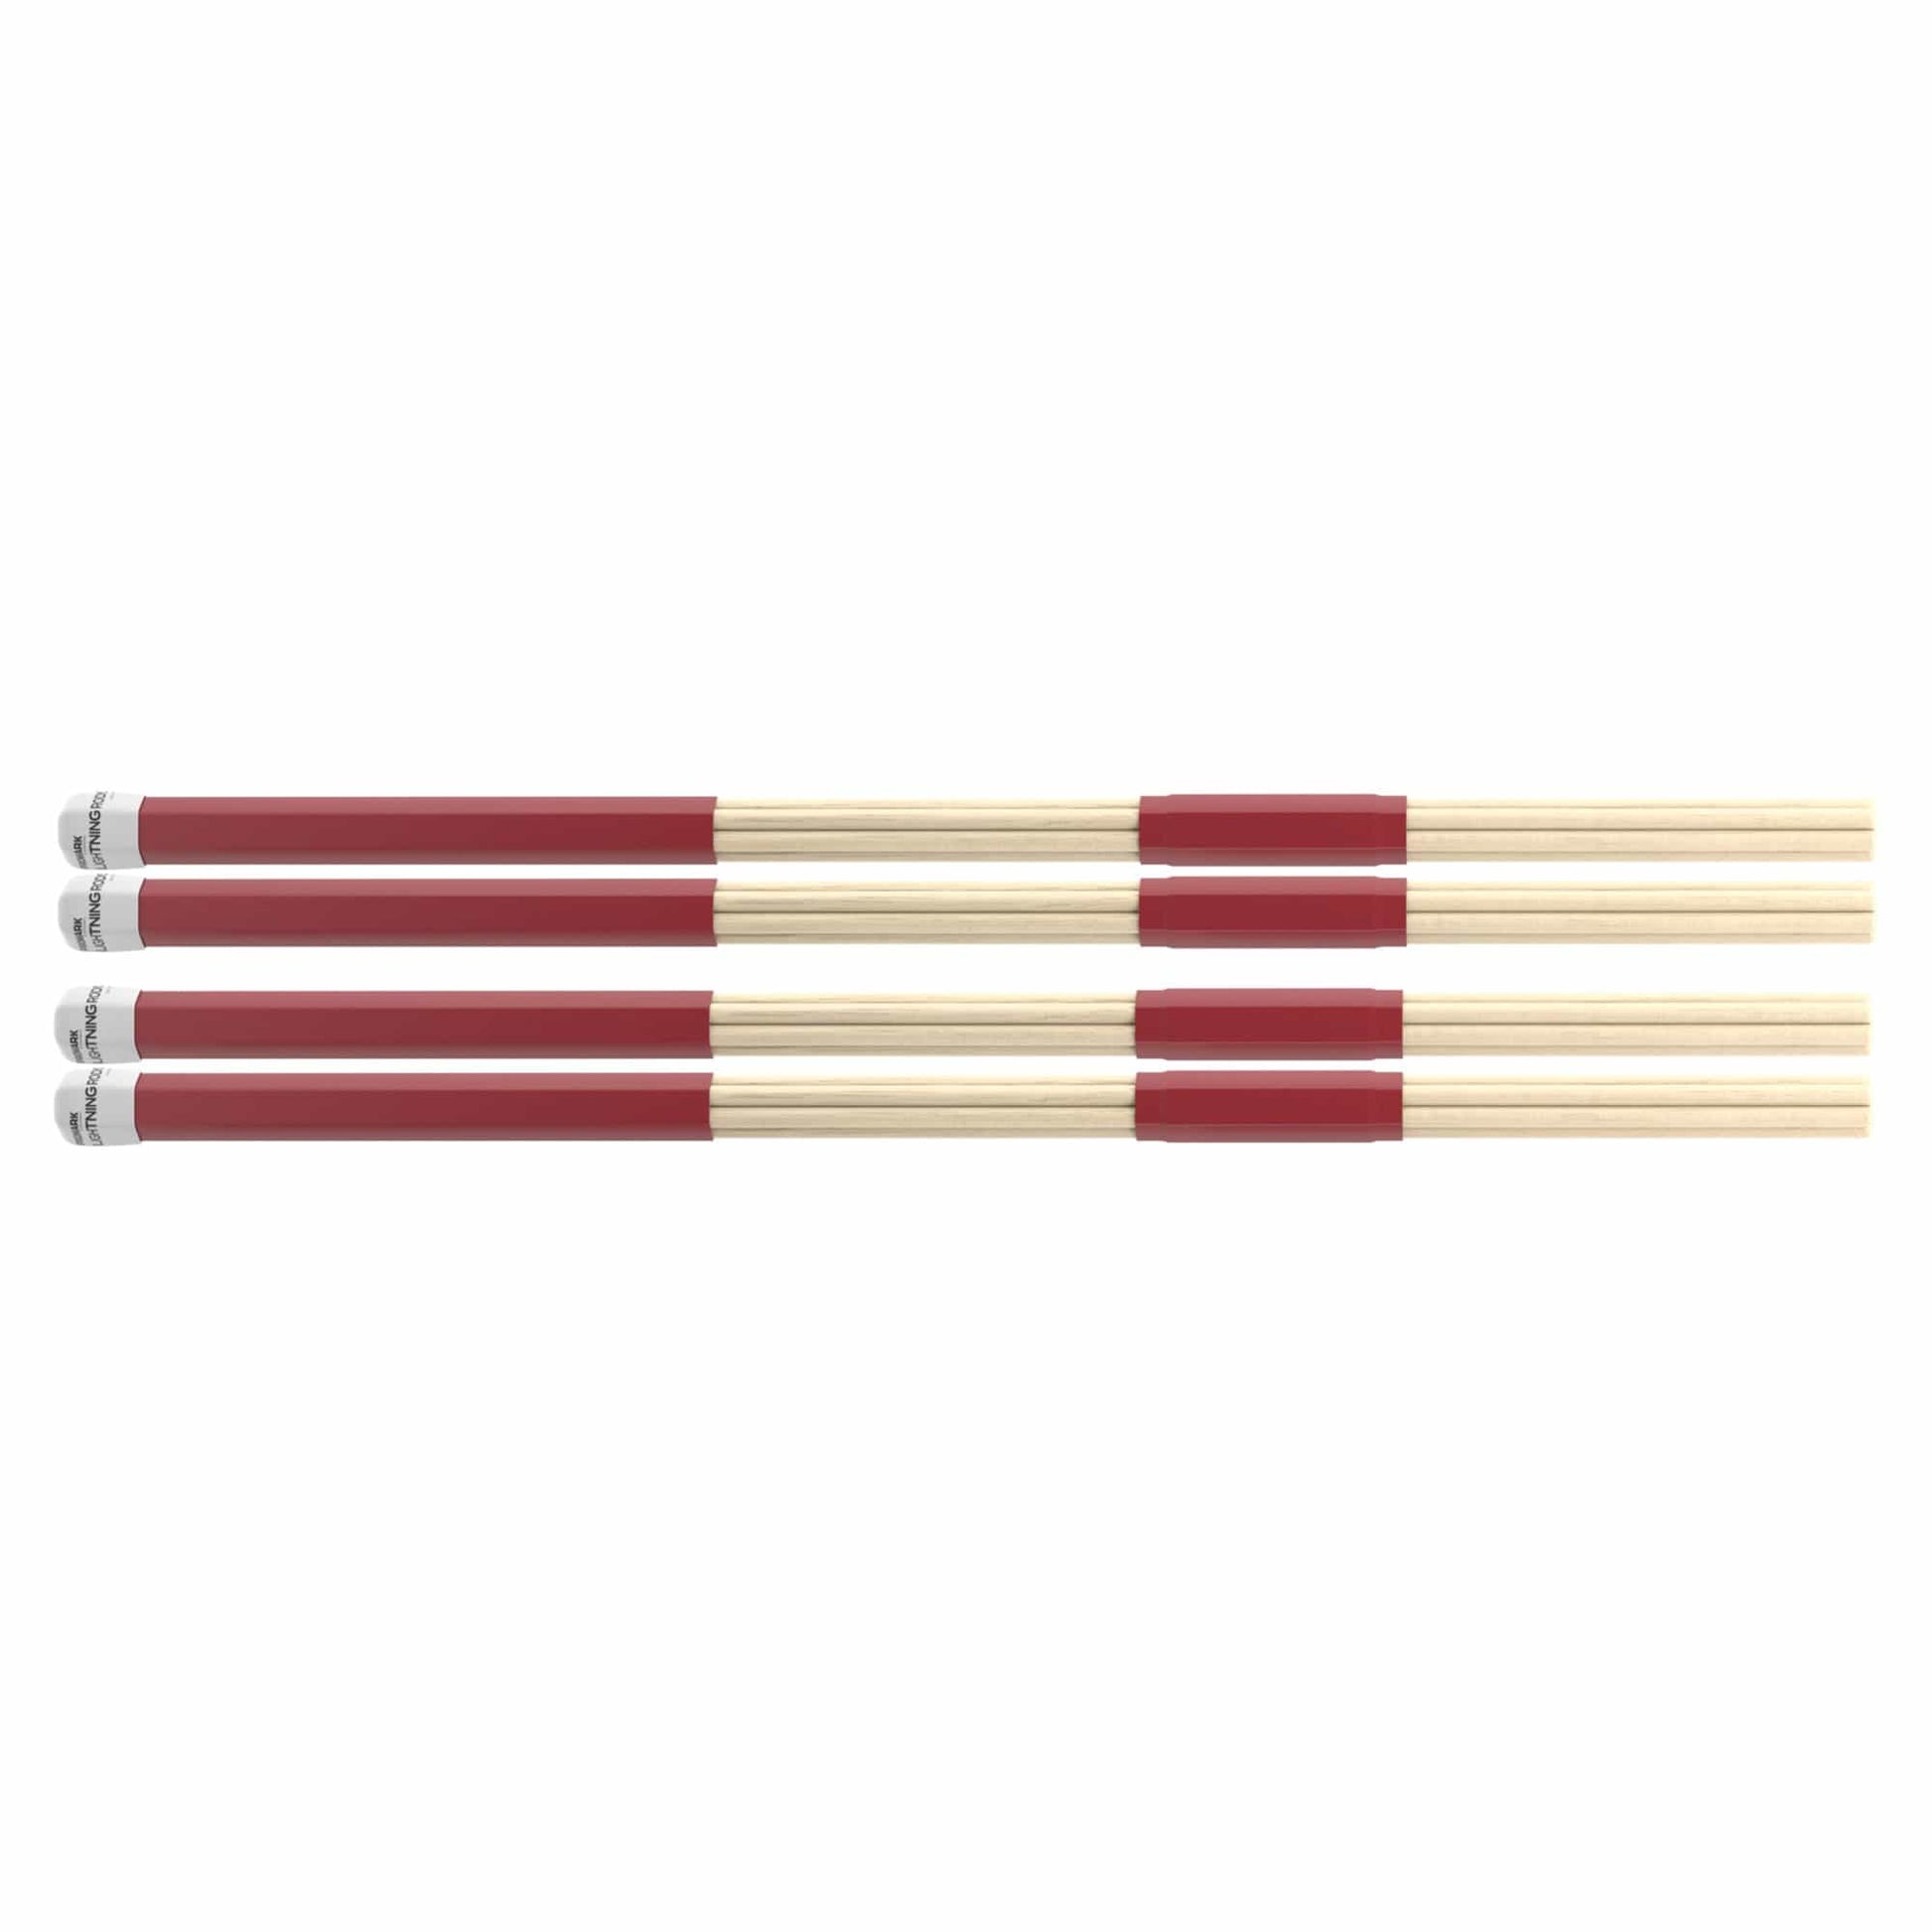 Promark Lightning Rods (2 Pack Bundle) Drums and Percussion / Parts and Accessories / Drum Sticks and Mallets